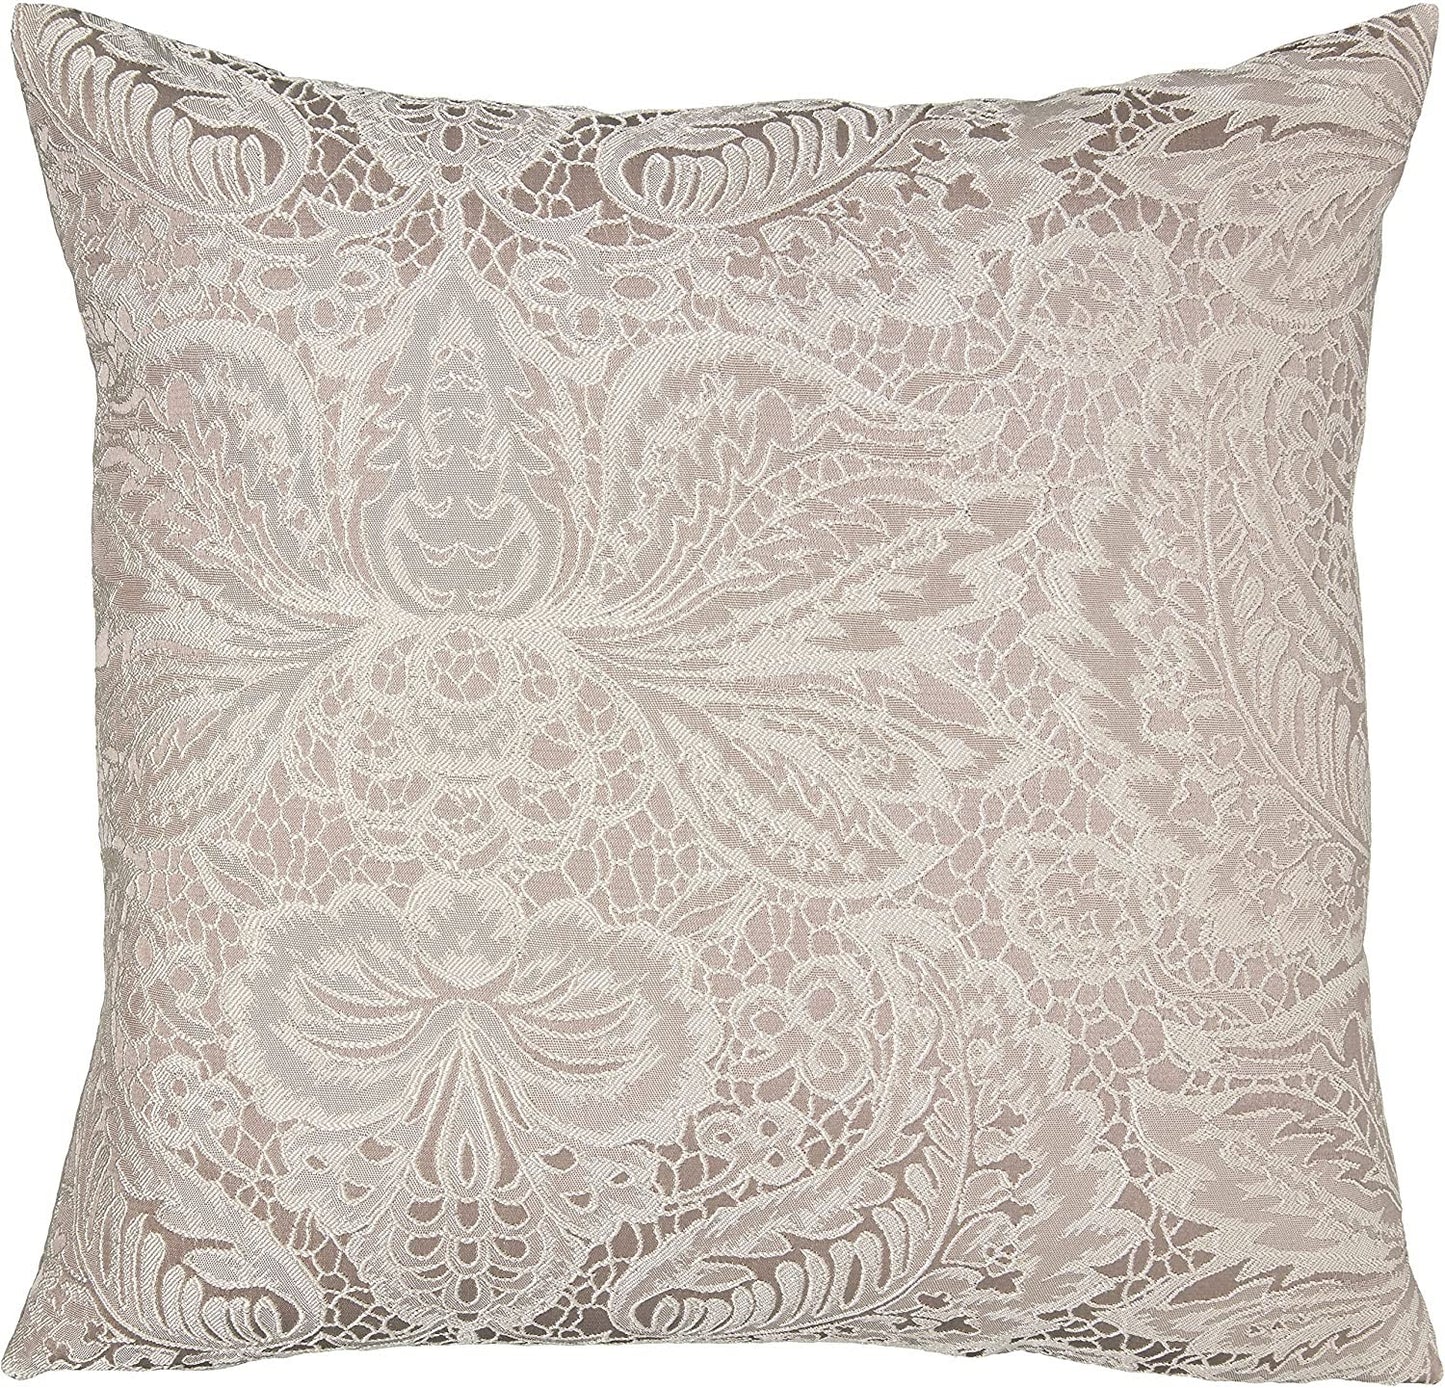 Pacifica Lace Look Damask Pattern Decorative Throw Pillow Cover